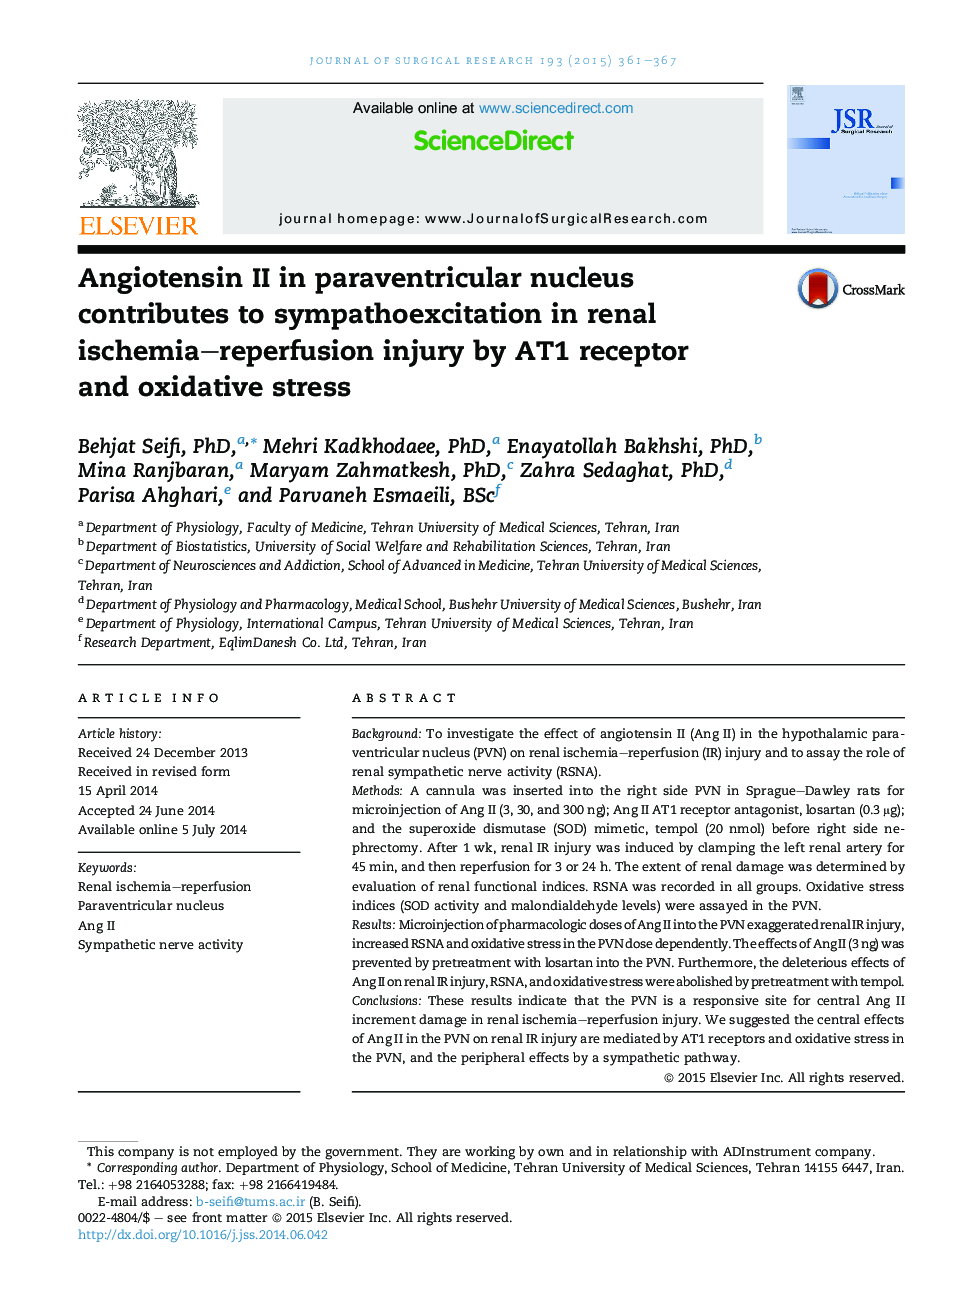 Shock/Sepsis/Trauma/Critical CareAngiotensin II in paraventricular nucleus contributes to sympathoexcitation in renal ischemia-reperfusion injury by AT1 receptor and oxidative stress